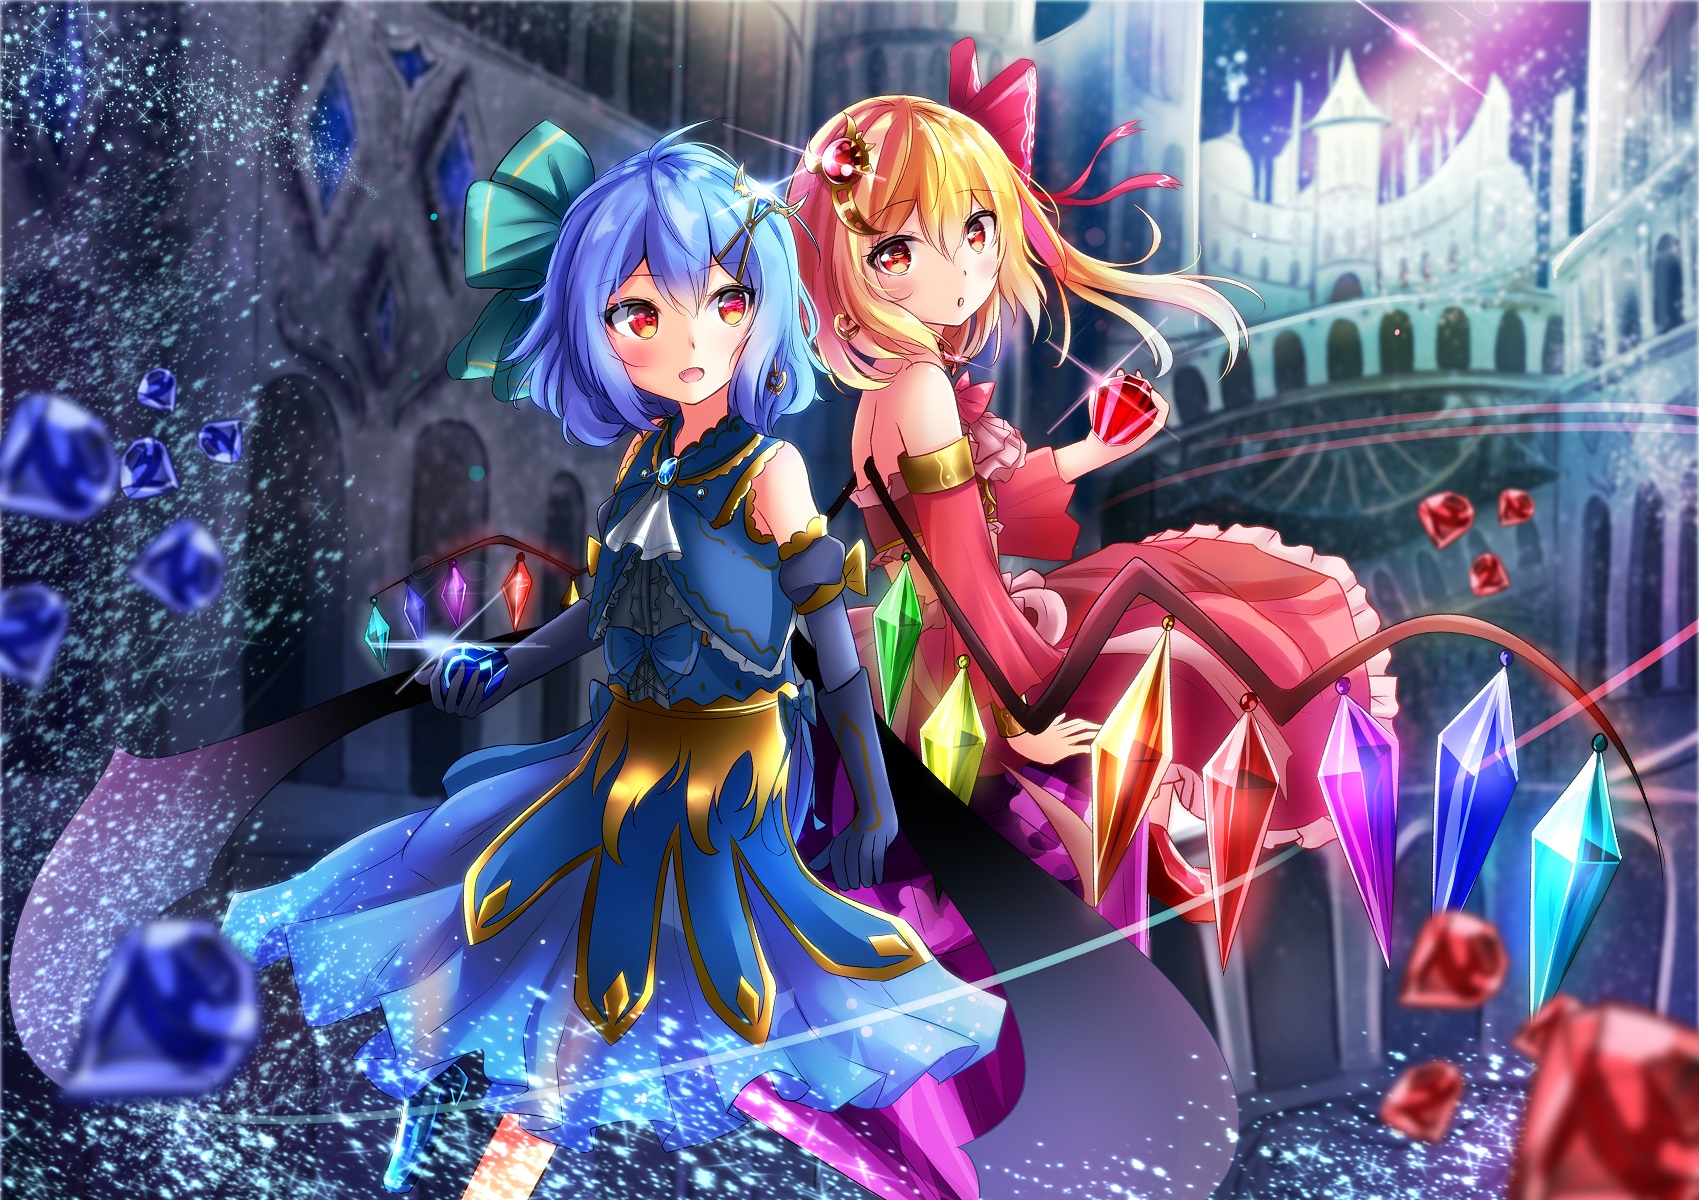 Remilia and Flandre by Renka